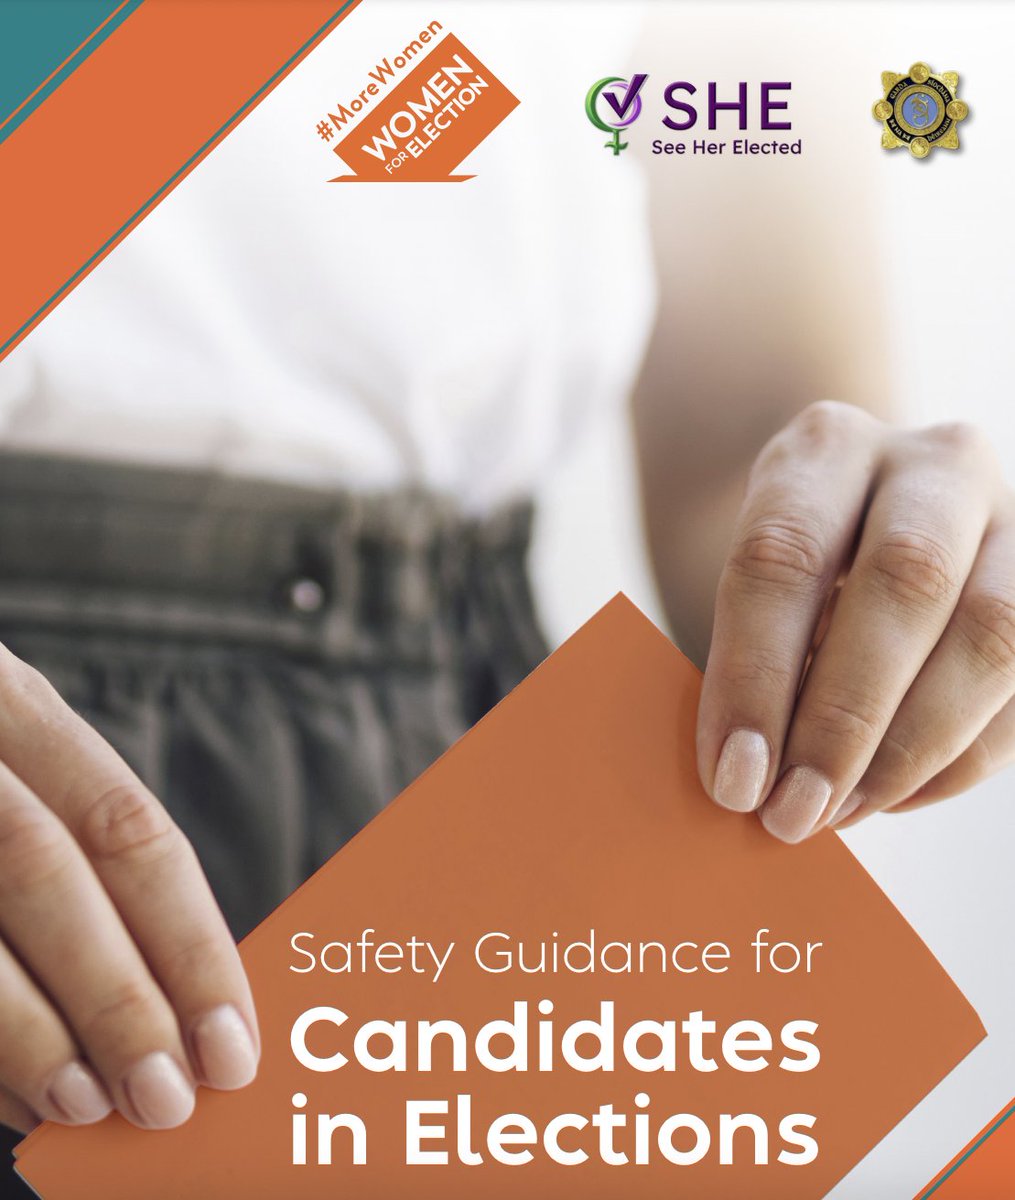 We teamed up with @SeeHerElected and @GardaTraffic to produce a safety guide for women candidates running for #LE24 🗳️ There are more women than ever running for election, and staying safe is number one priority View our guide here ⤵️ shorturl.at/ltLS9 #VoteWomen